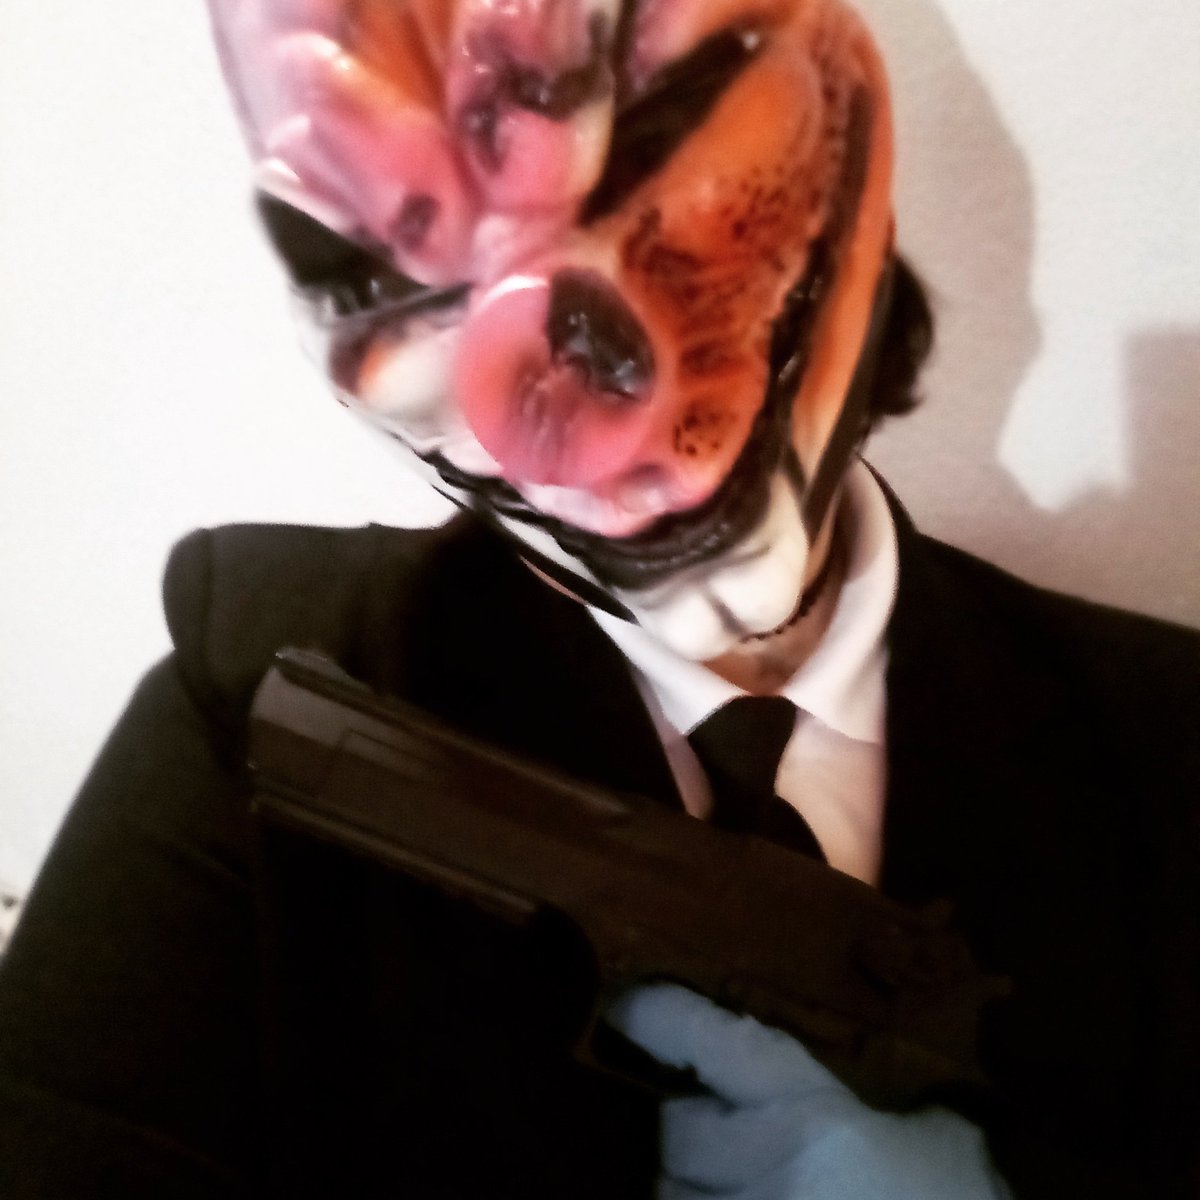 Vortigess On Twitter Ready For Some Heist Hoxton Payday2 Paydaycosplay Payday Games Cosplay Guns Mask - hoxton roblox